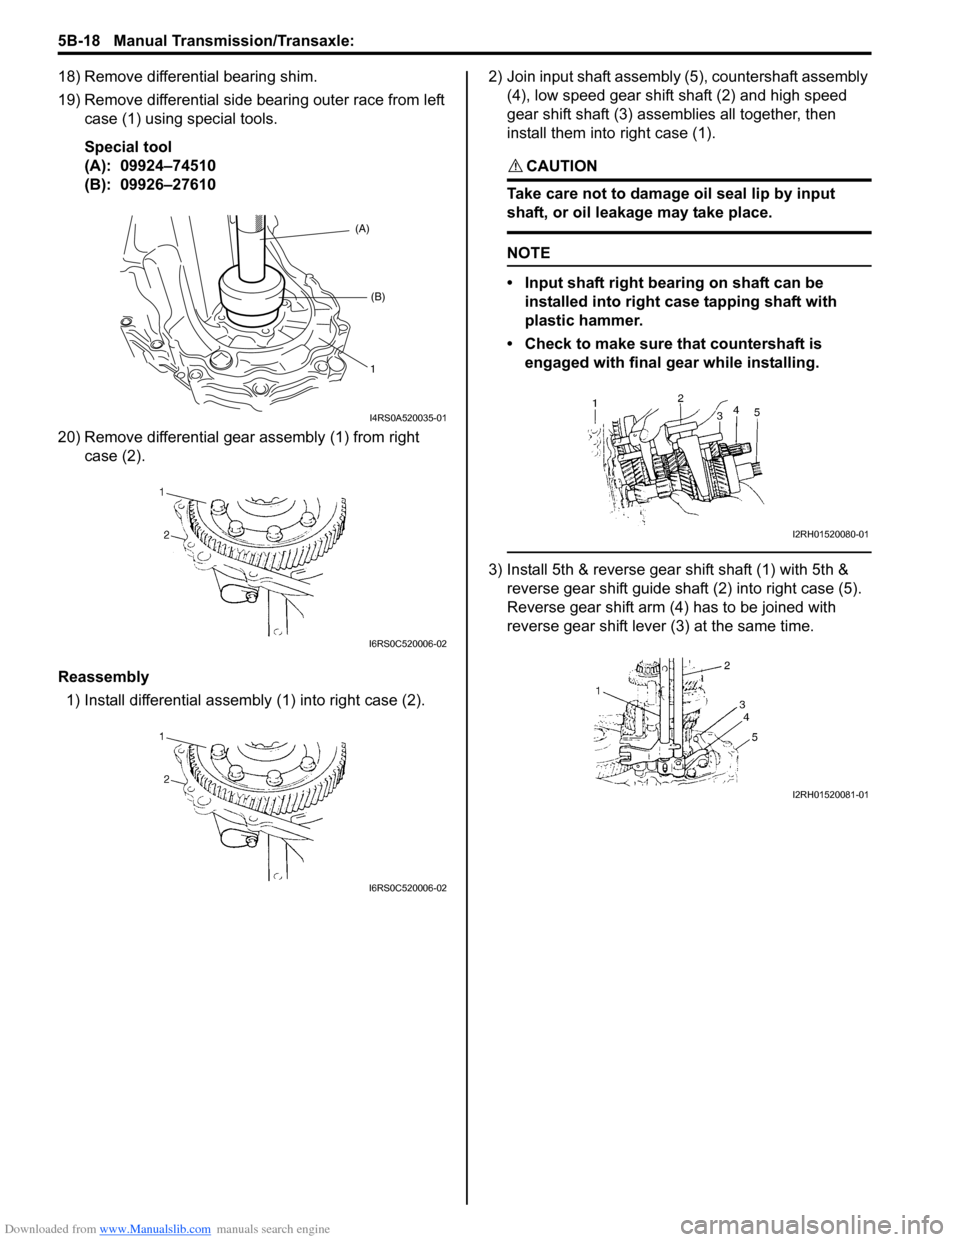 SUZUKI SWIFT 2006 2.G Service Owners Manual Downloaded from www.Manualslib.com manuals search engine 5B-18 Manual Transmission/Transaxle: 
18) Remove differential bearing shim.
19) Remove differential side bearing outer race from left case (1) 